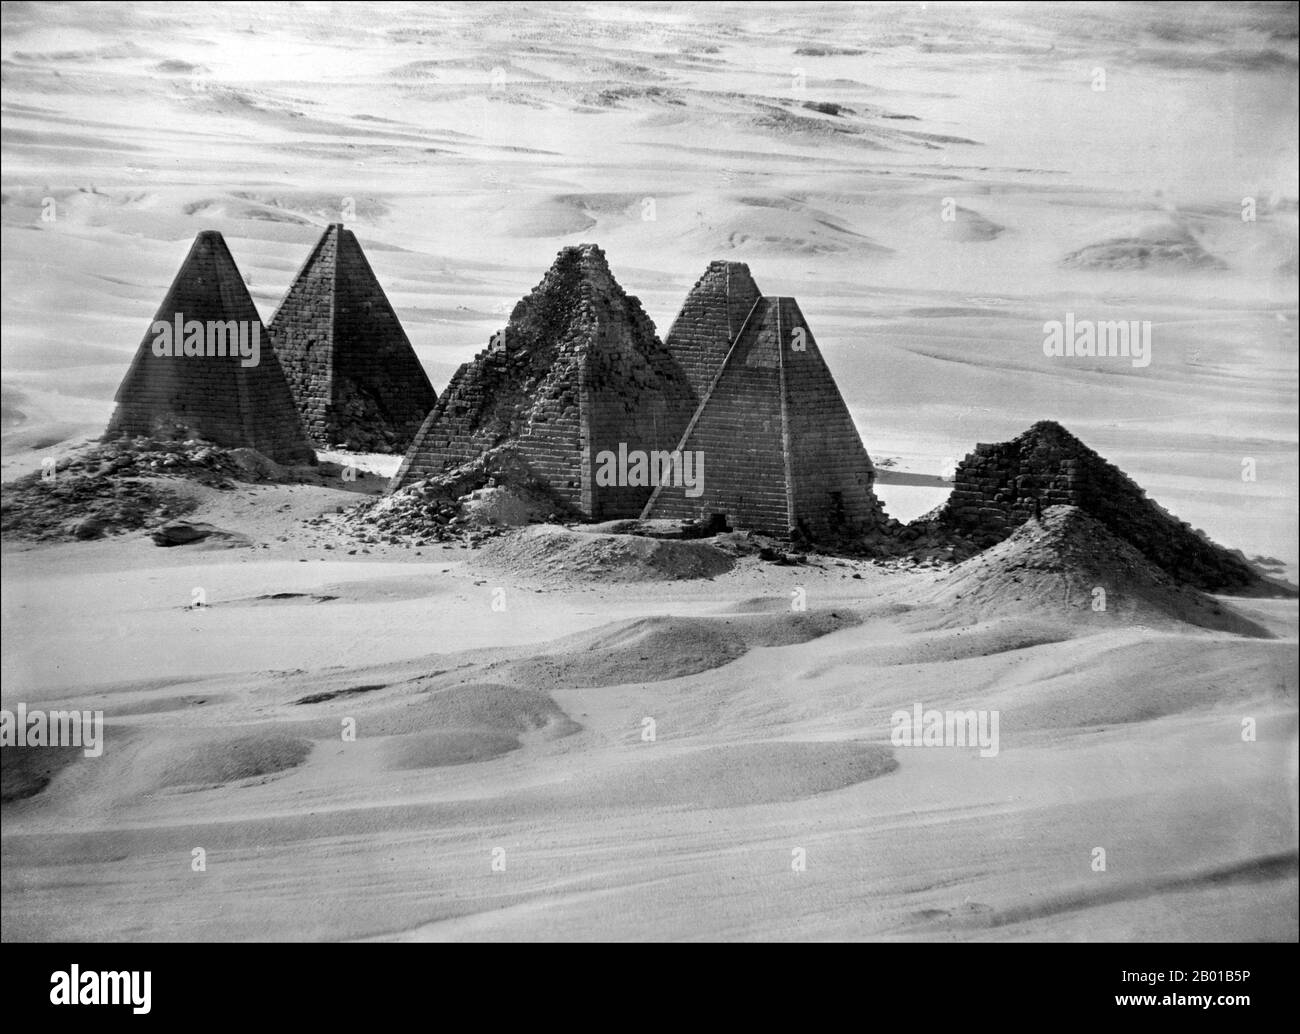 Sudan: Nubian pyramids of the Third Meroitic Period (c. 100 BCE - 150 CE) at Jebel Barkal, 1906.  Meroë (also spelled Meroe) is the name of an ancient city on the east bank of the Nile about 6 km north-east of the Kabushiya station near Shendi, Sudan, approximately 200 km north-east of Khartoum. Near the site are a group of villages called Bagrawiyah. This city was the capital of the Kingdom of Kush for several centuries. Stock Photo